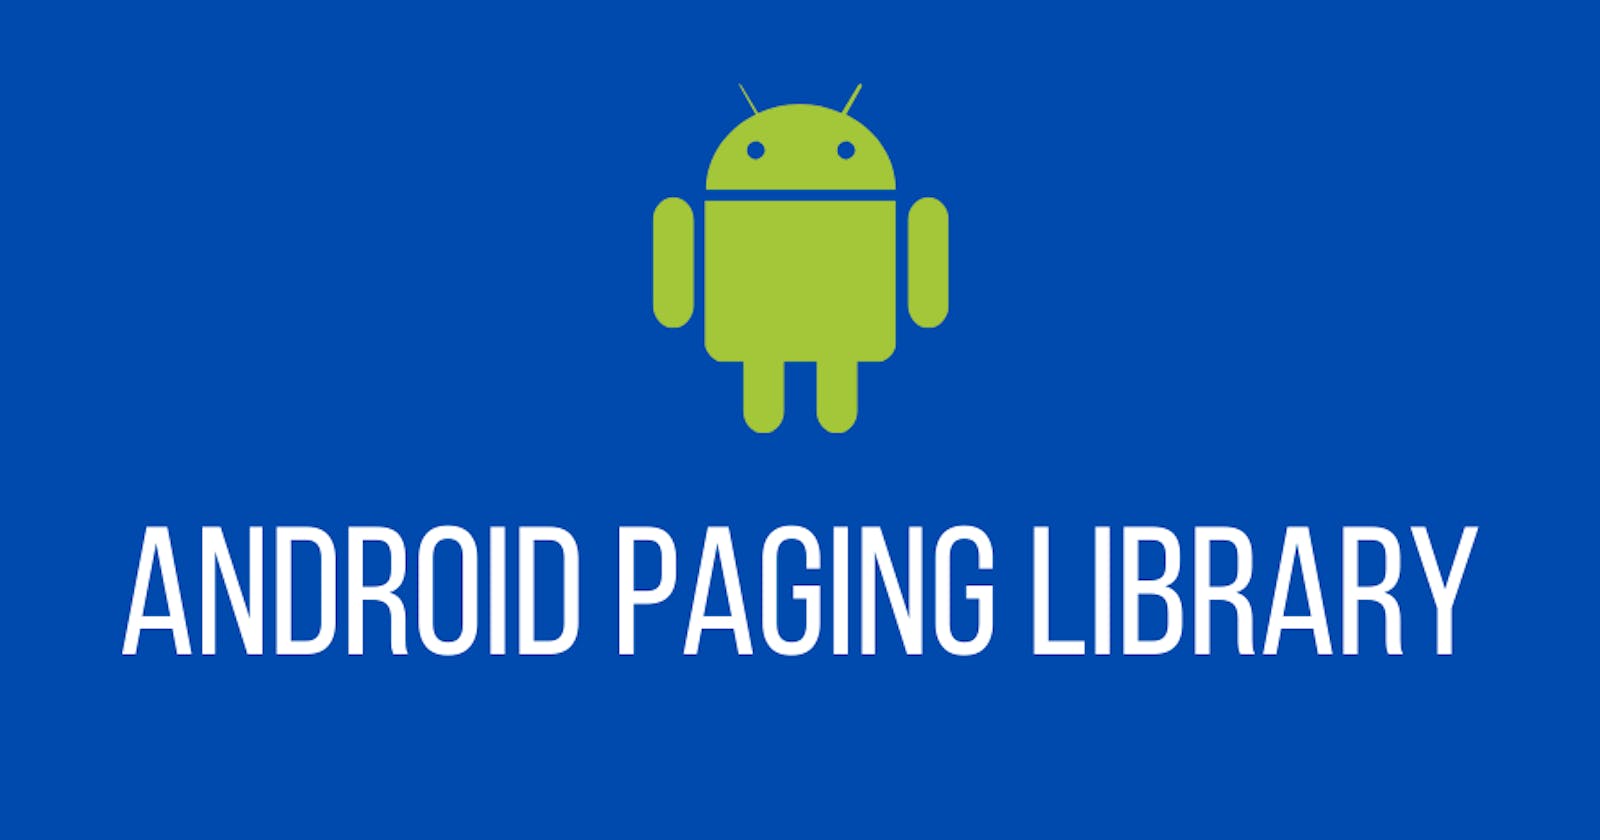 Using Android Paging Library + Clean Architecture